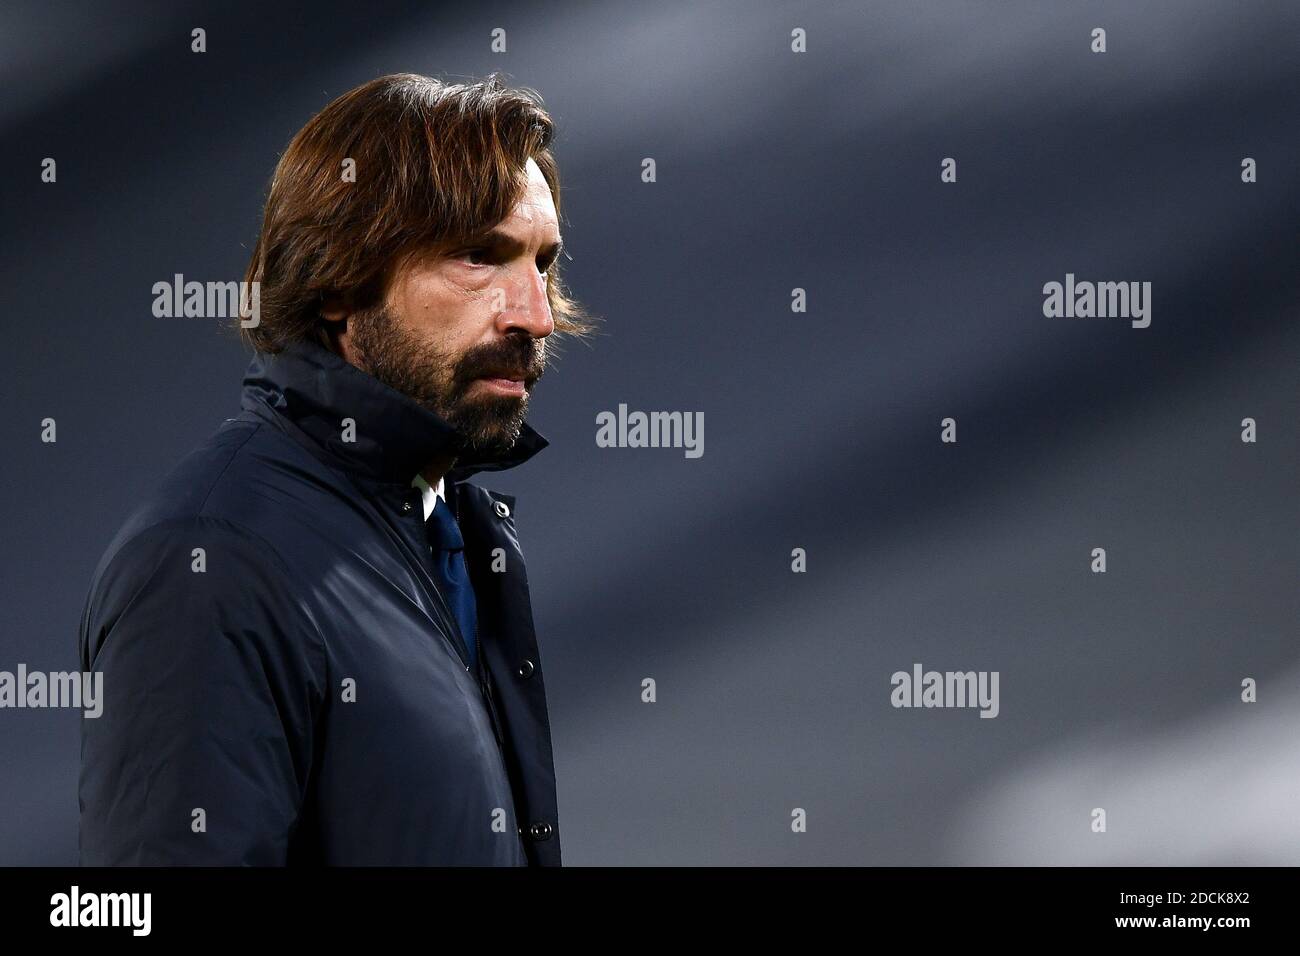 Turin, Italy - 21 November, 2020: Andrea Pirlo, head coach of Juventus FC, looks on prior to the Serie A football match between Juventus FC and Cagliari Calcio. Credit: Nicolò Campo/Alamy Live News Stock Photo